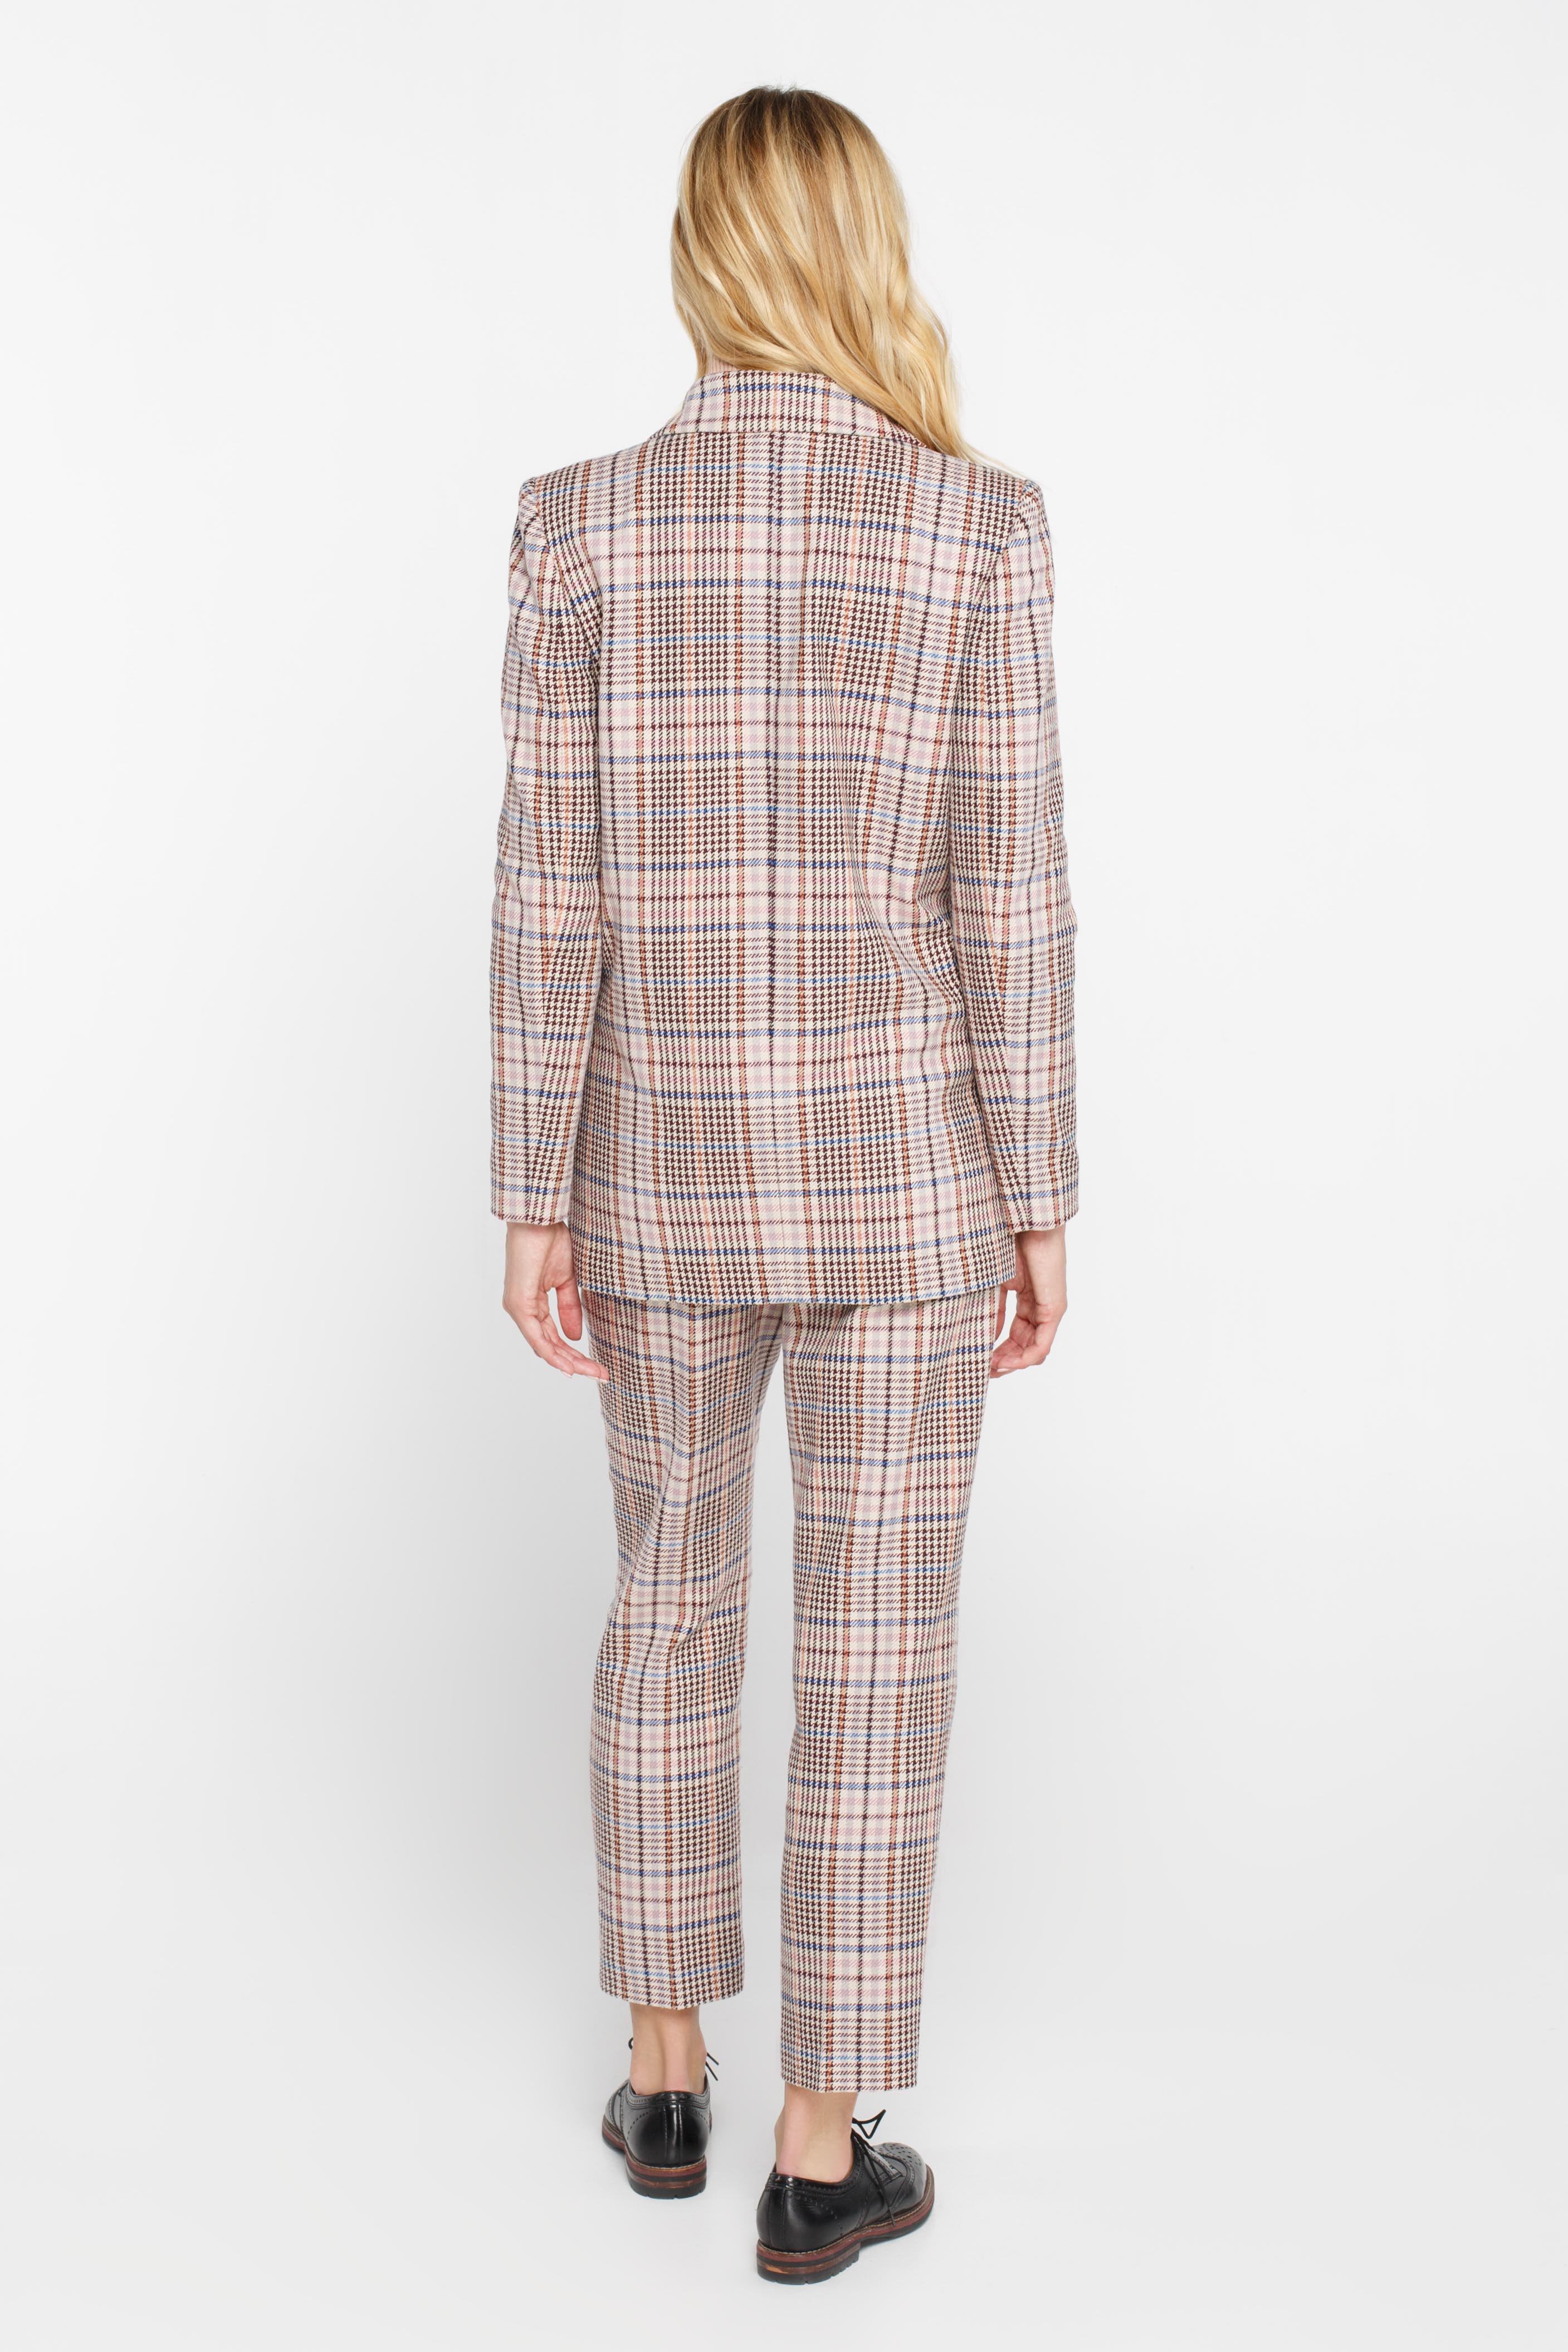 Double-breasted beige plaid suit fabric jacket, photo 5